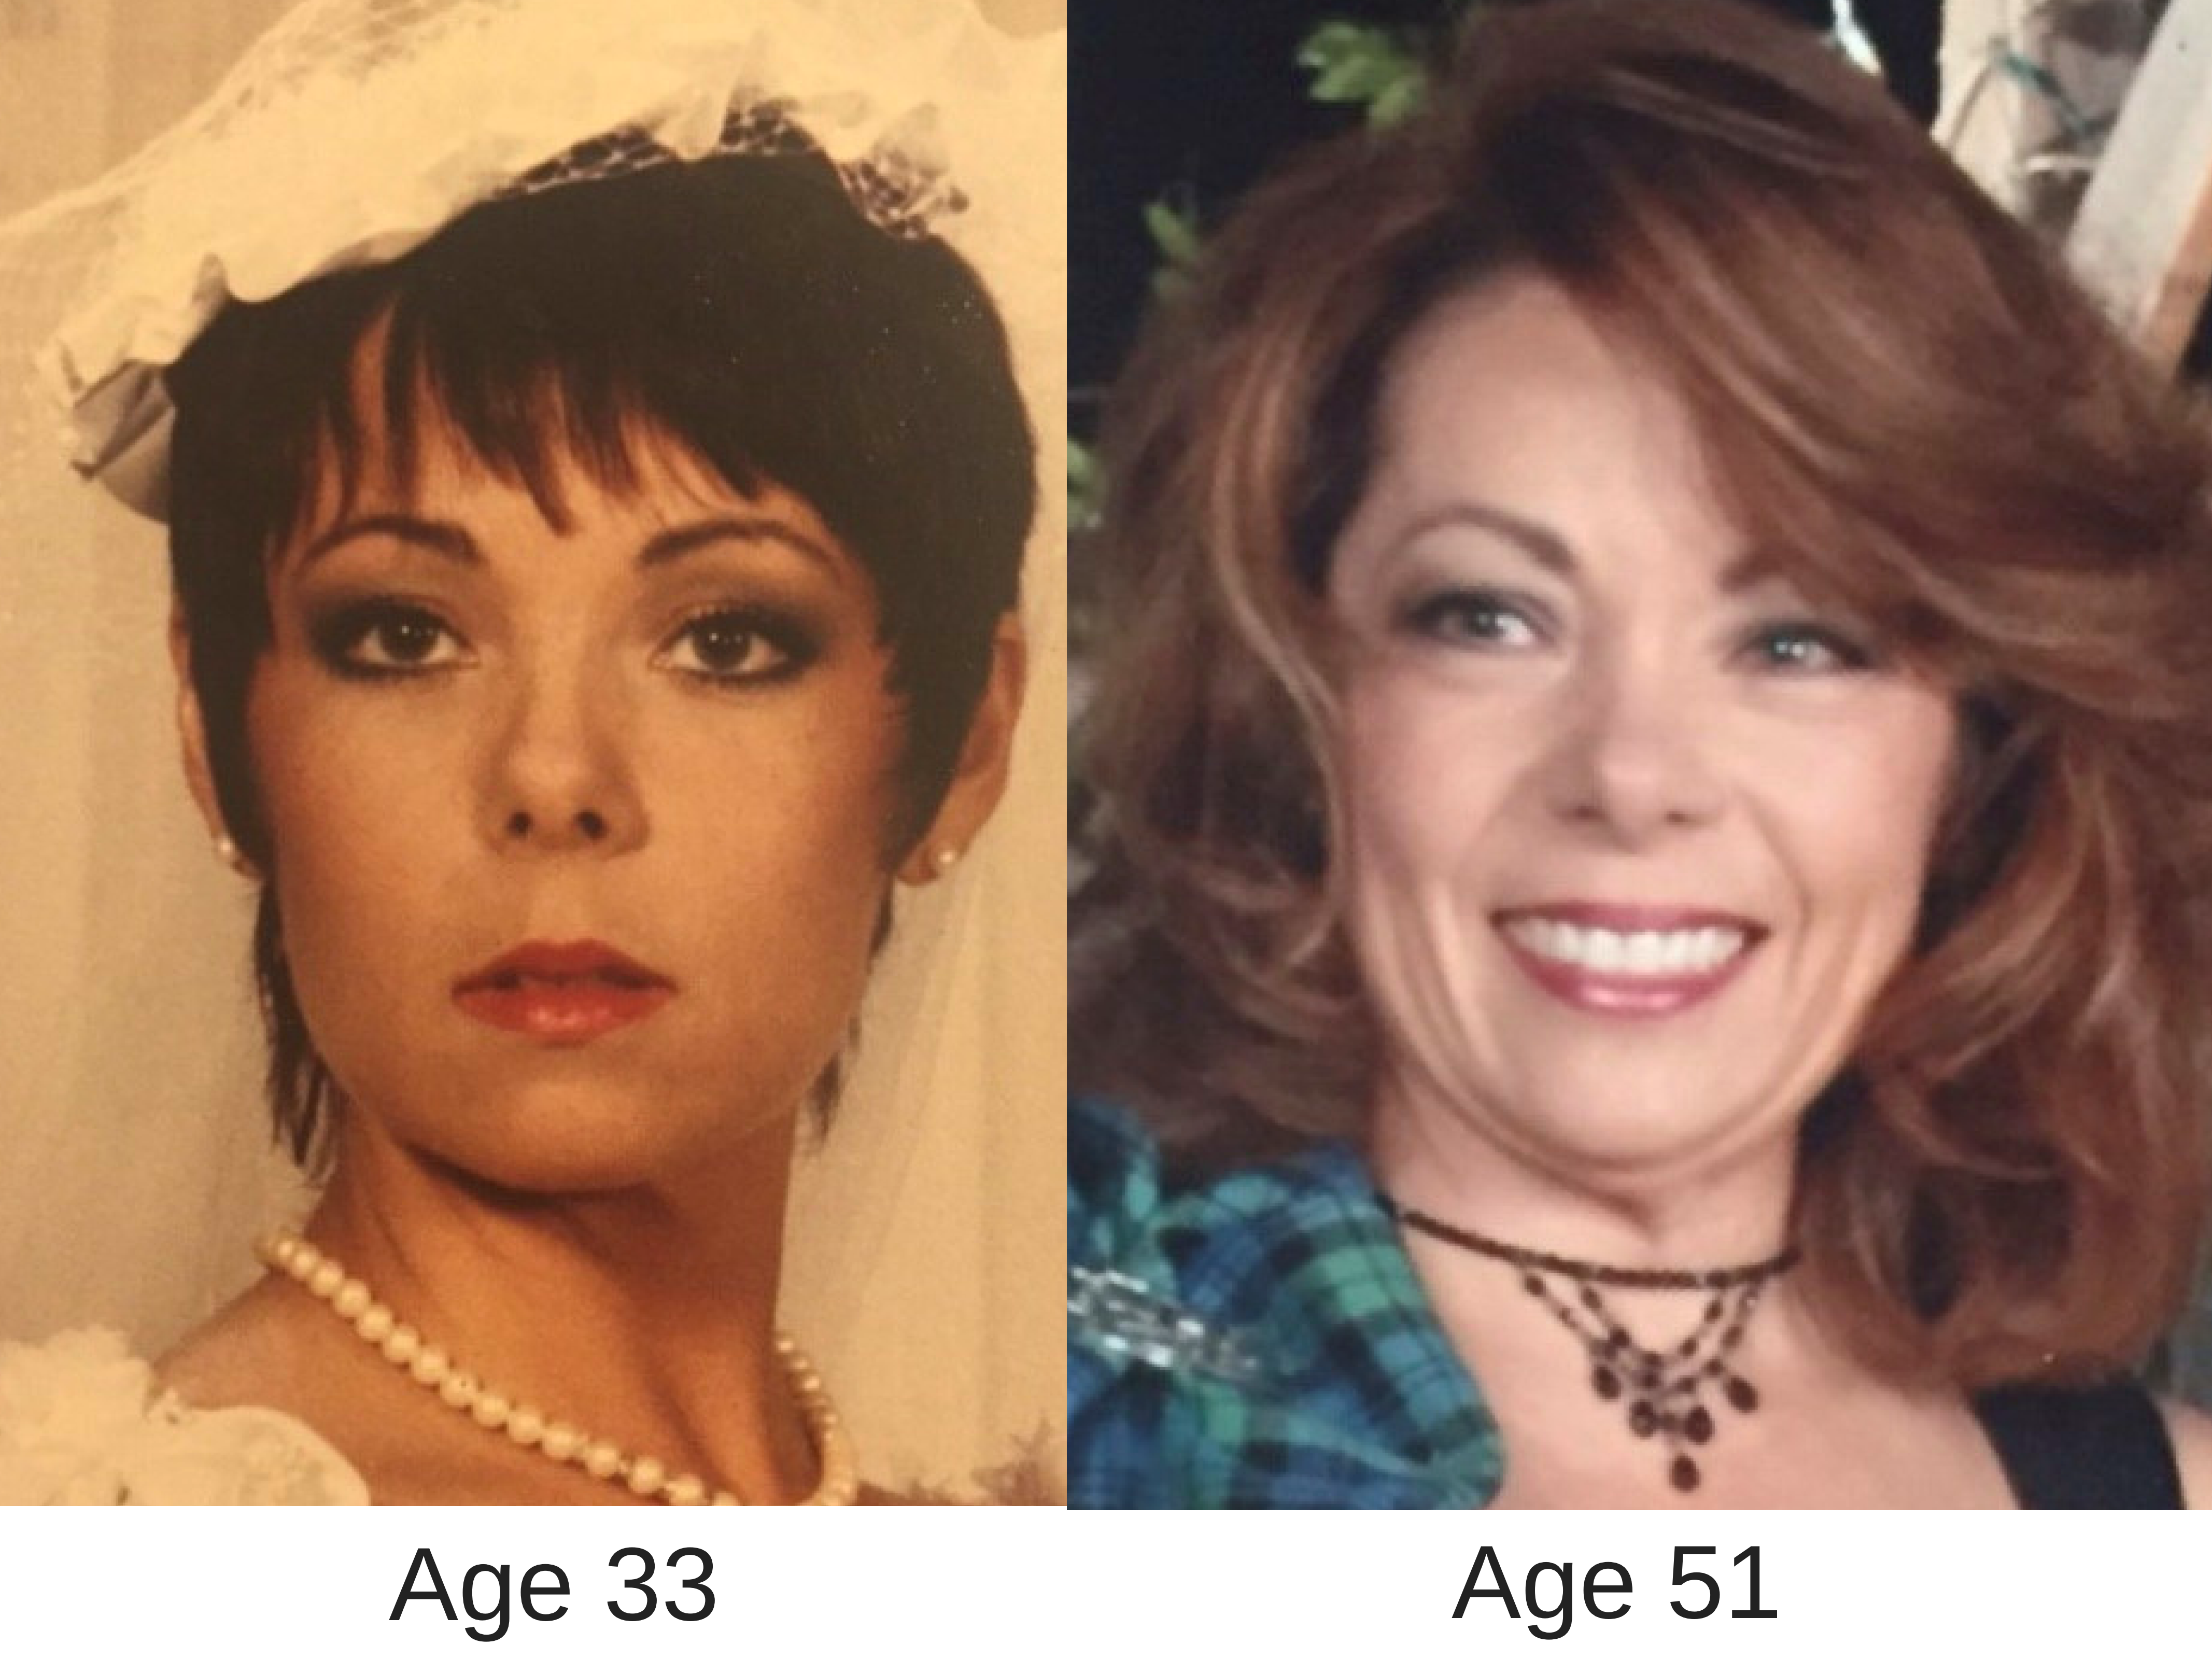 Woman age 33 and age 51